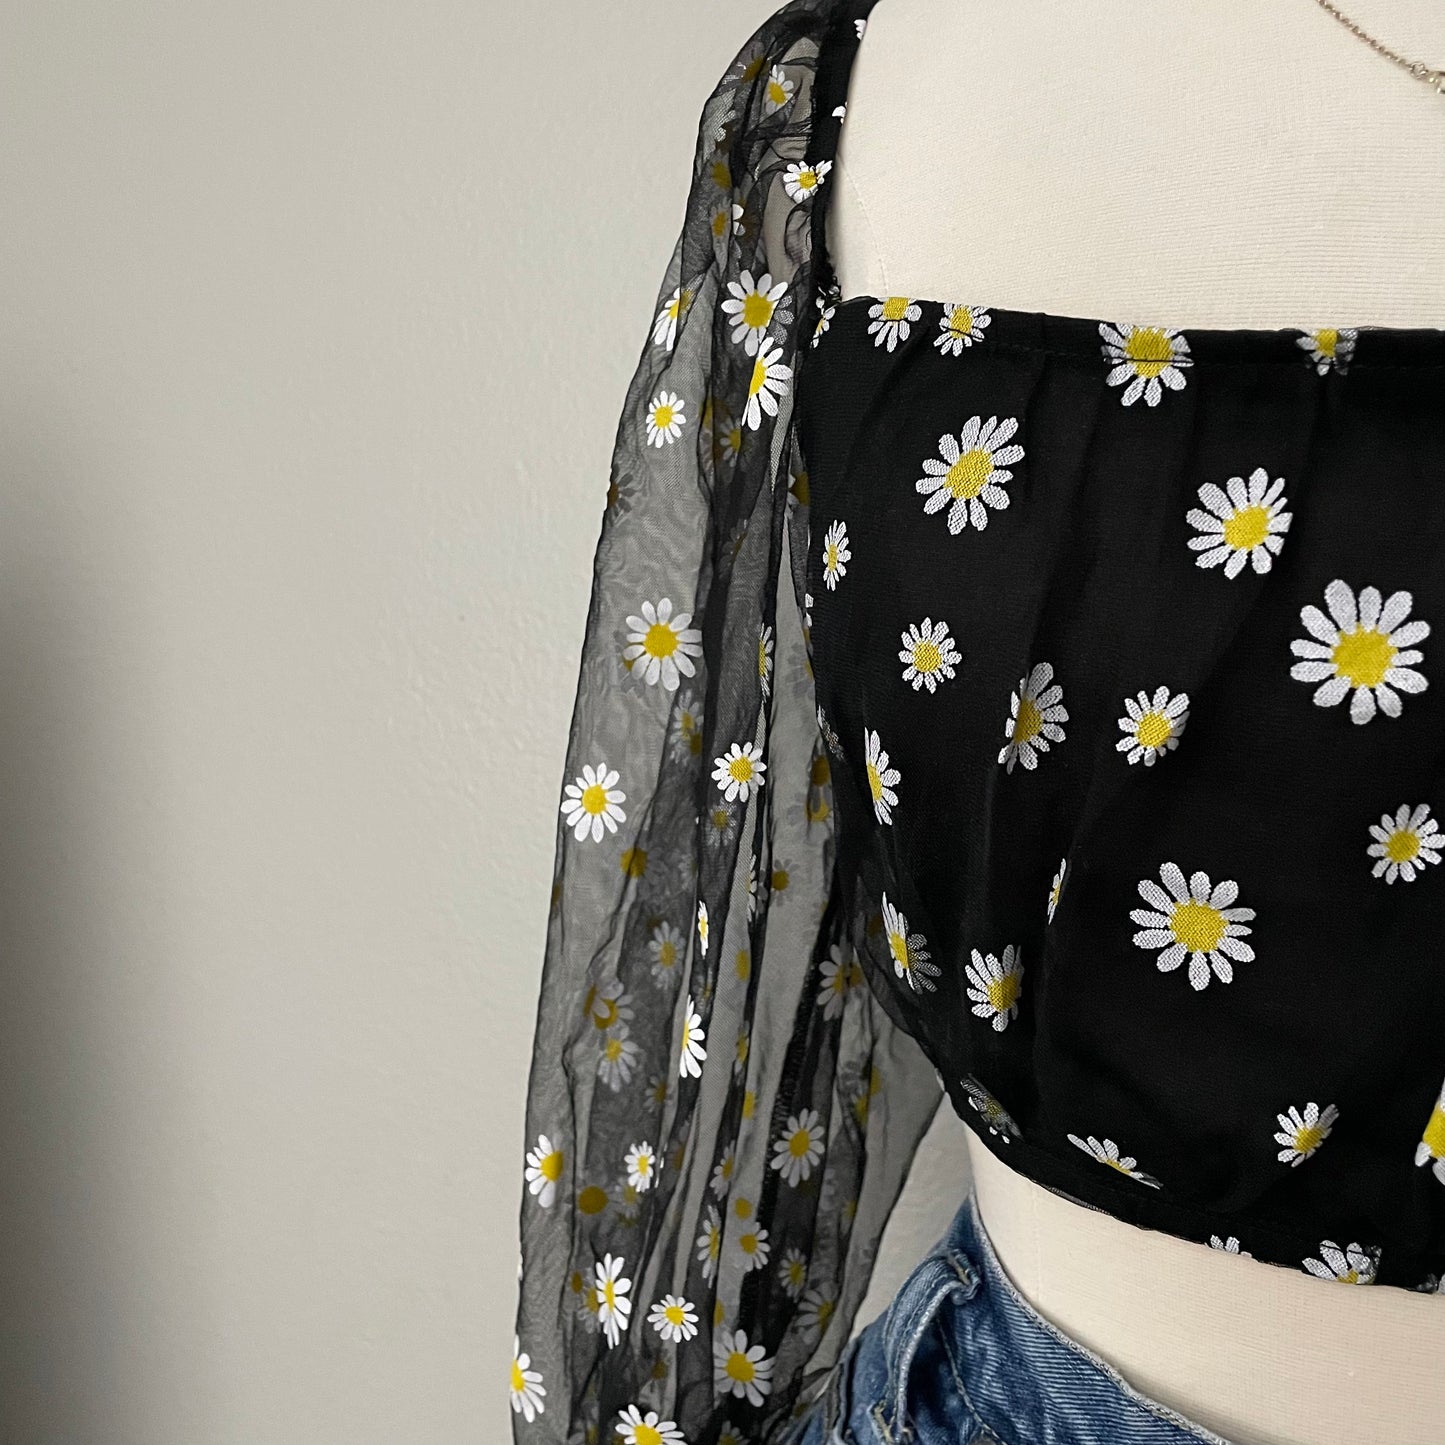 Daisy Crop Top With Sheer Sleeves (2XL)